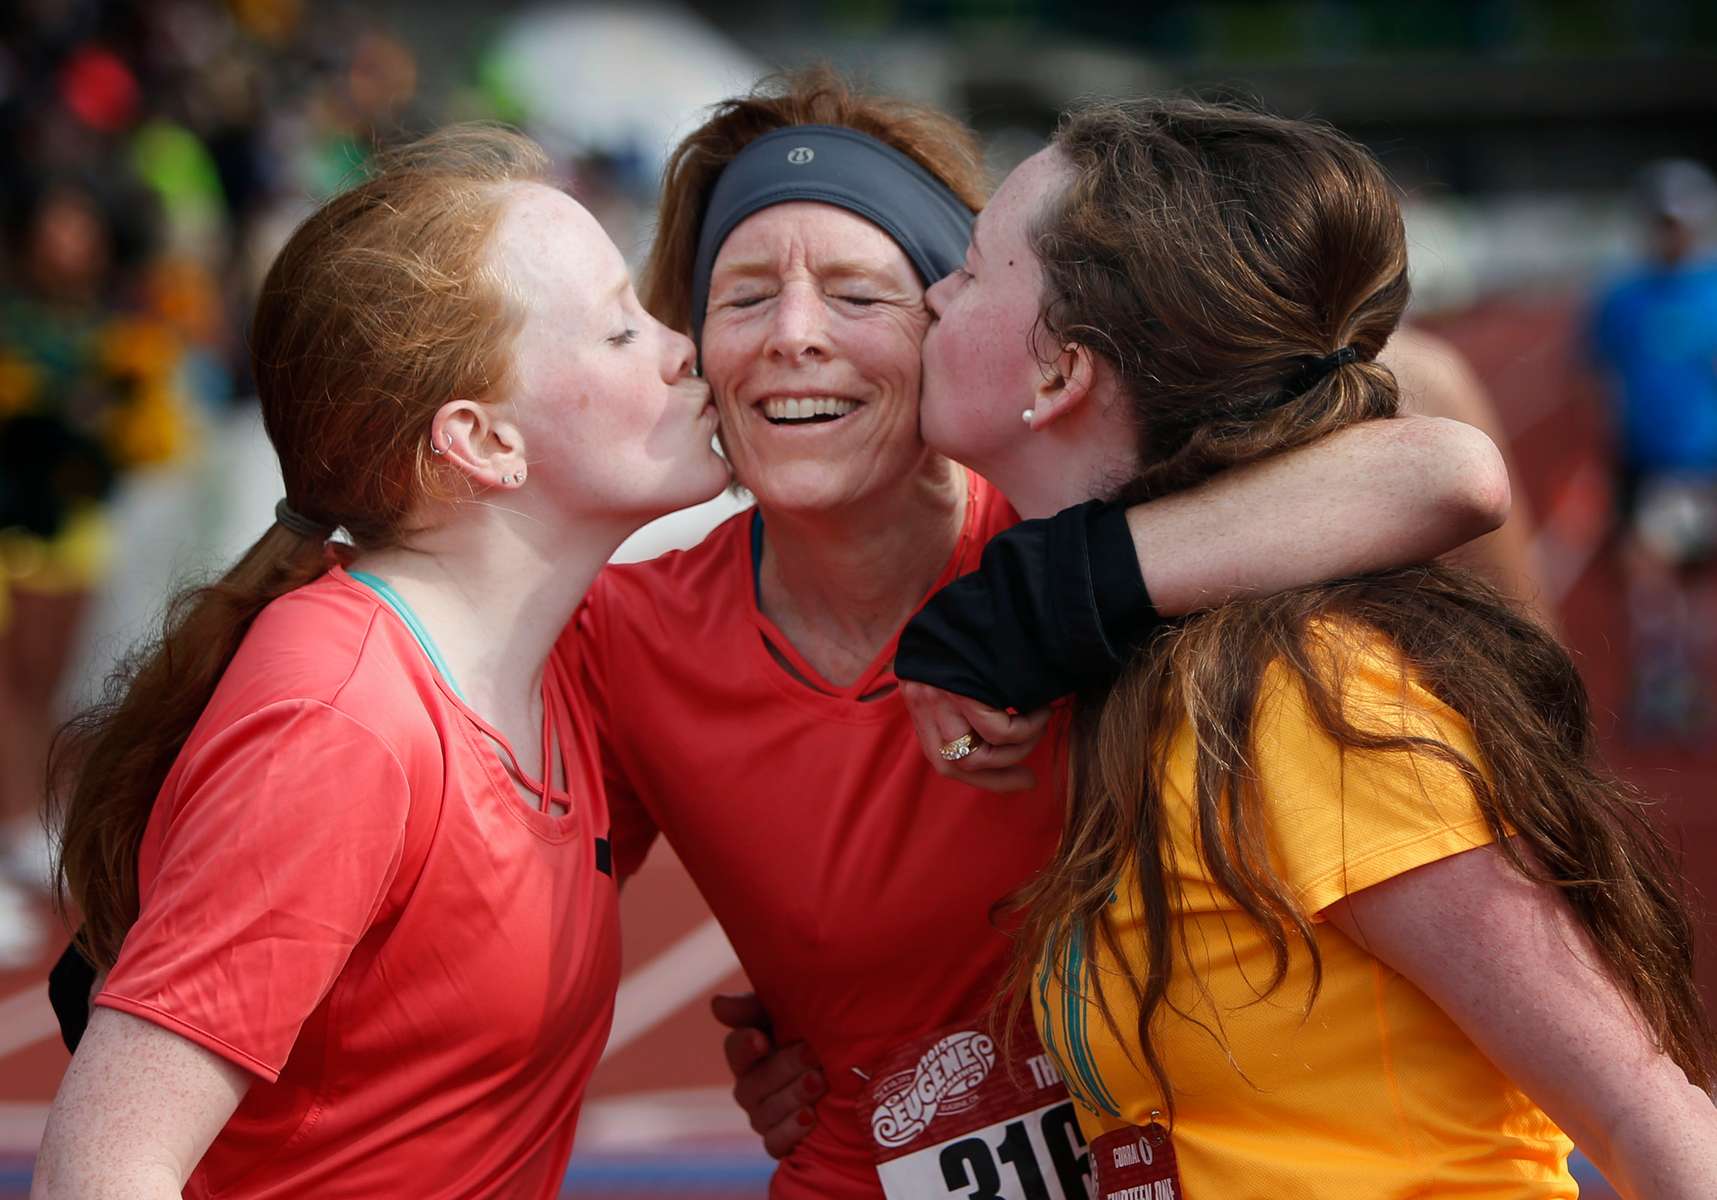 McKay Sohlberg, center, is given a kiss by her daughters, Ericka Sohlberg, left, and Tatum Sohlberg, right, after she completed the 13.1 mile half-marathon at the Eugene Marathon. The event coincided this year with Mother's Day. 